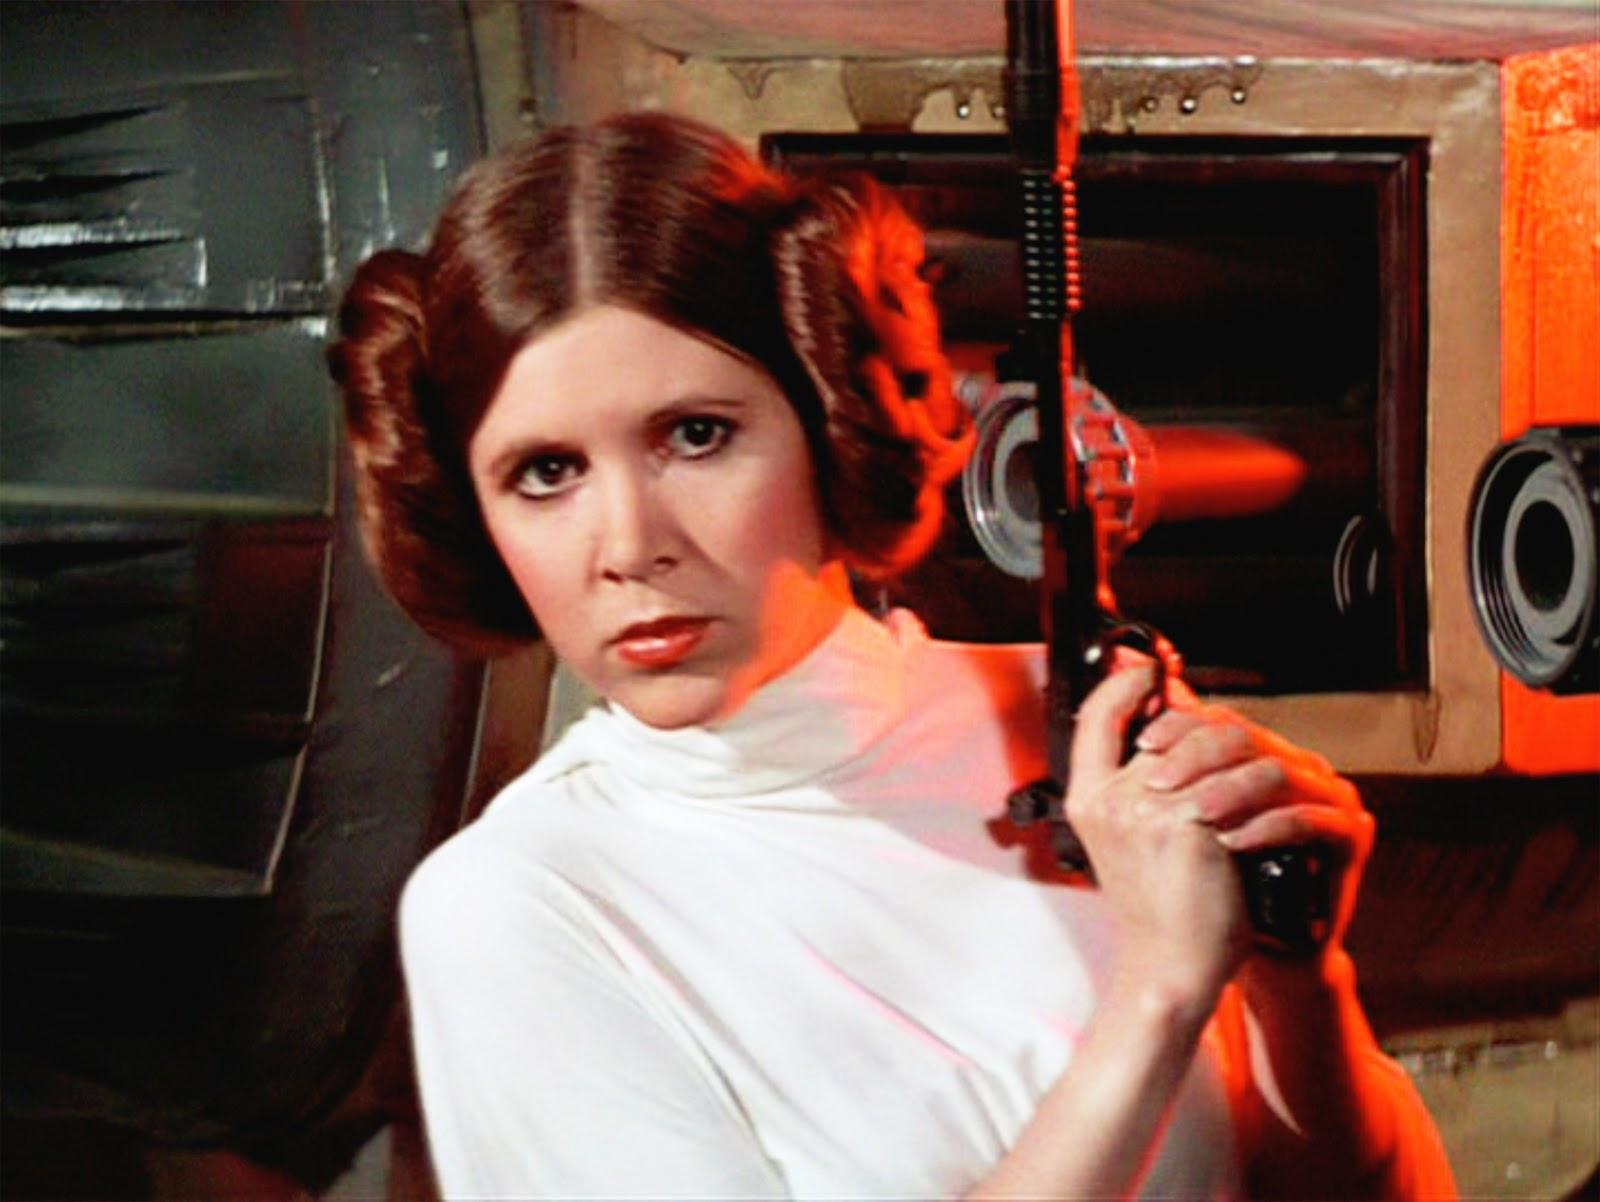 Carrie Fisher as Princess Leia in Star Wars IV: A New Hope